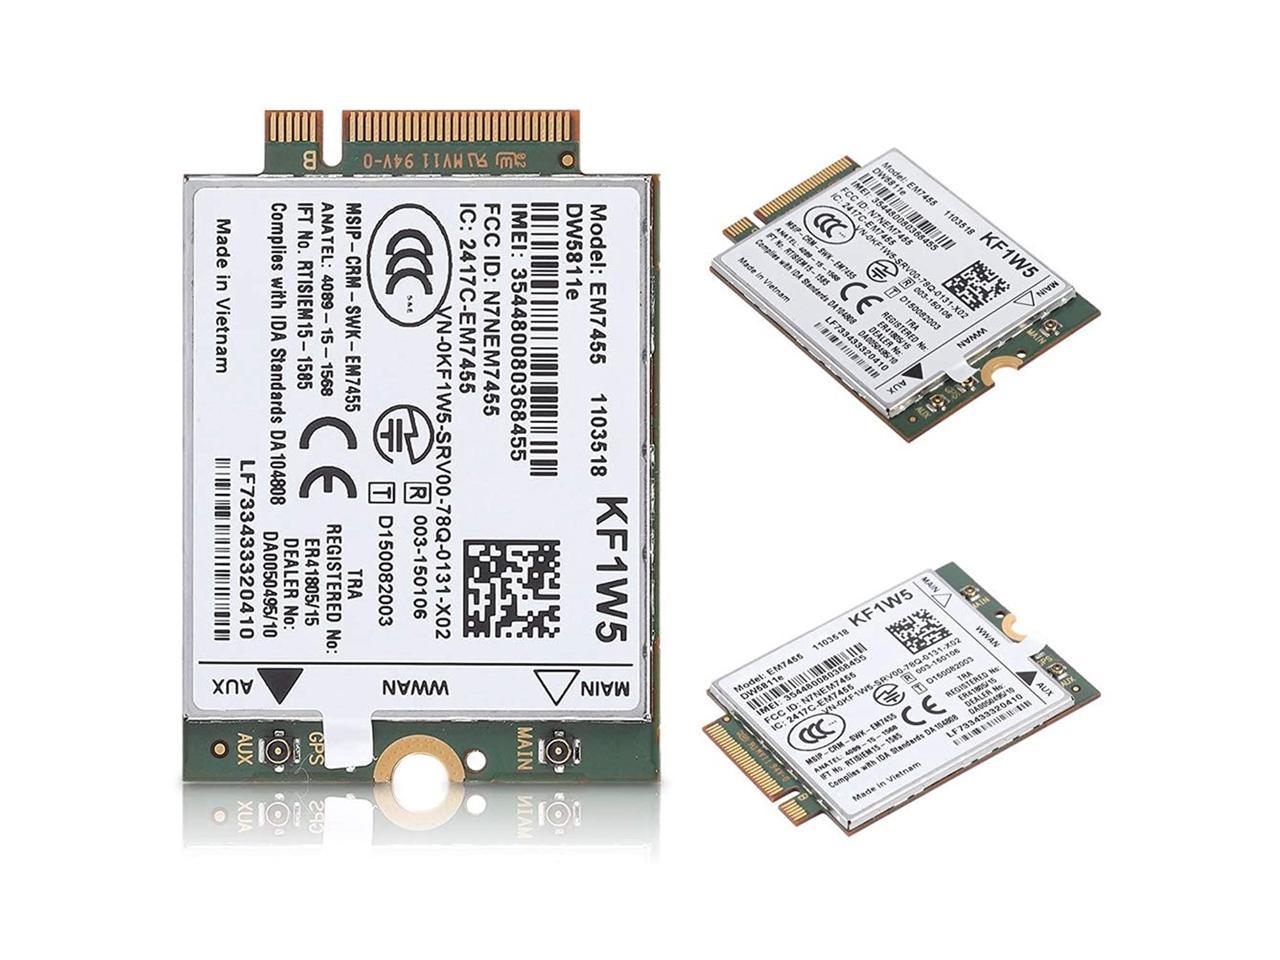 EM7455 Card Wireless 4G LTE WWAN NGFF Module for Dell Latitude Series 50 Mbps Max Upload Speed 300 Mbps Max Download Speed